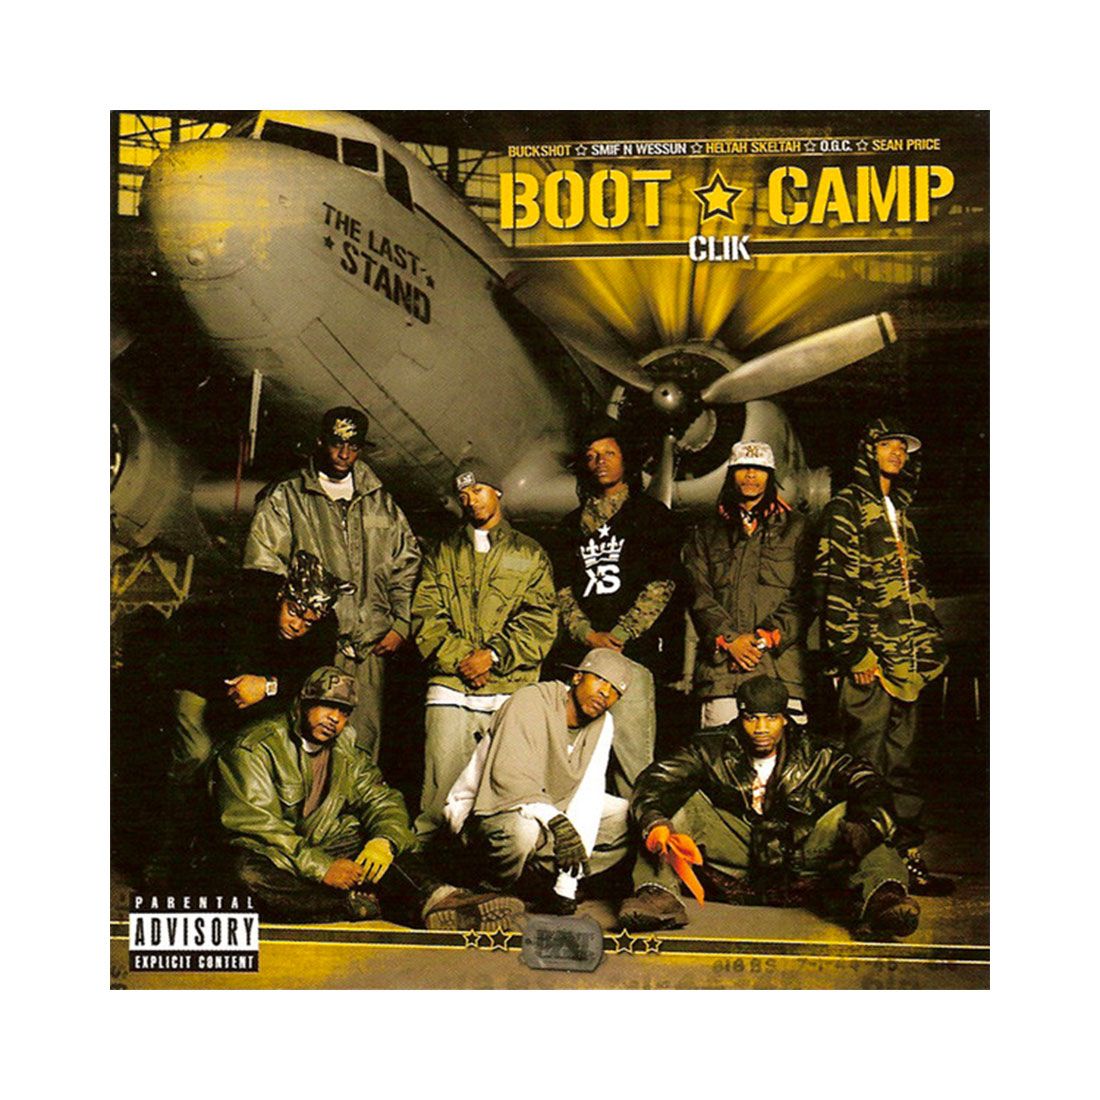 Boot Camp Clik 'The Last Stand'